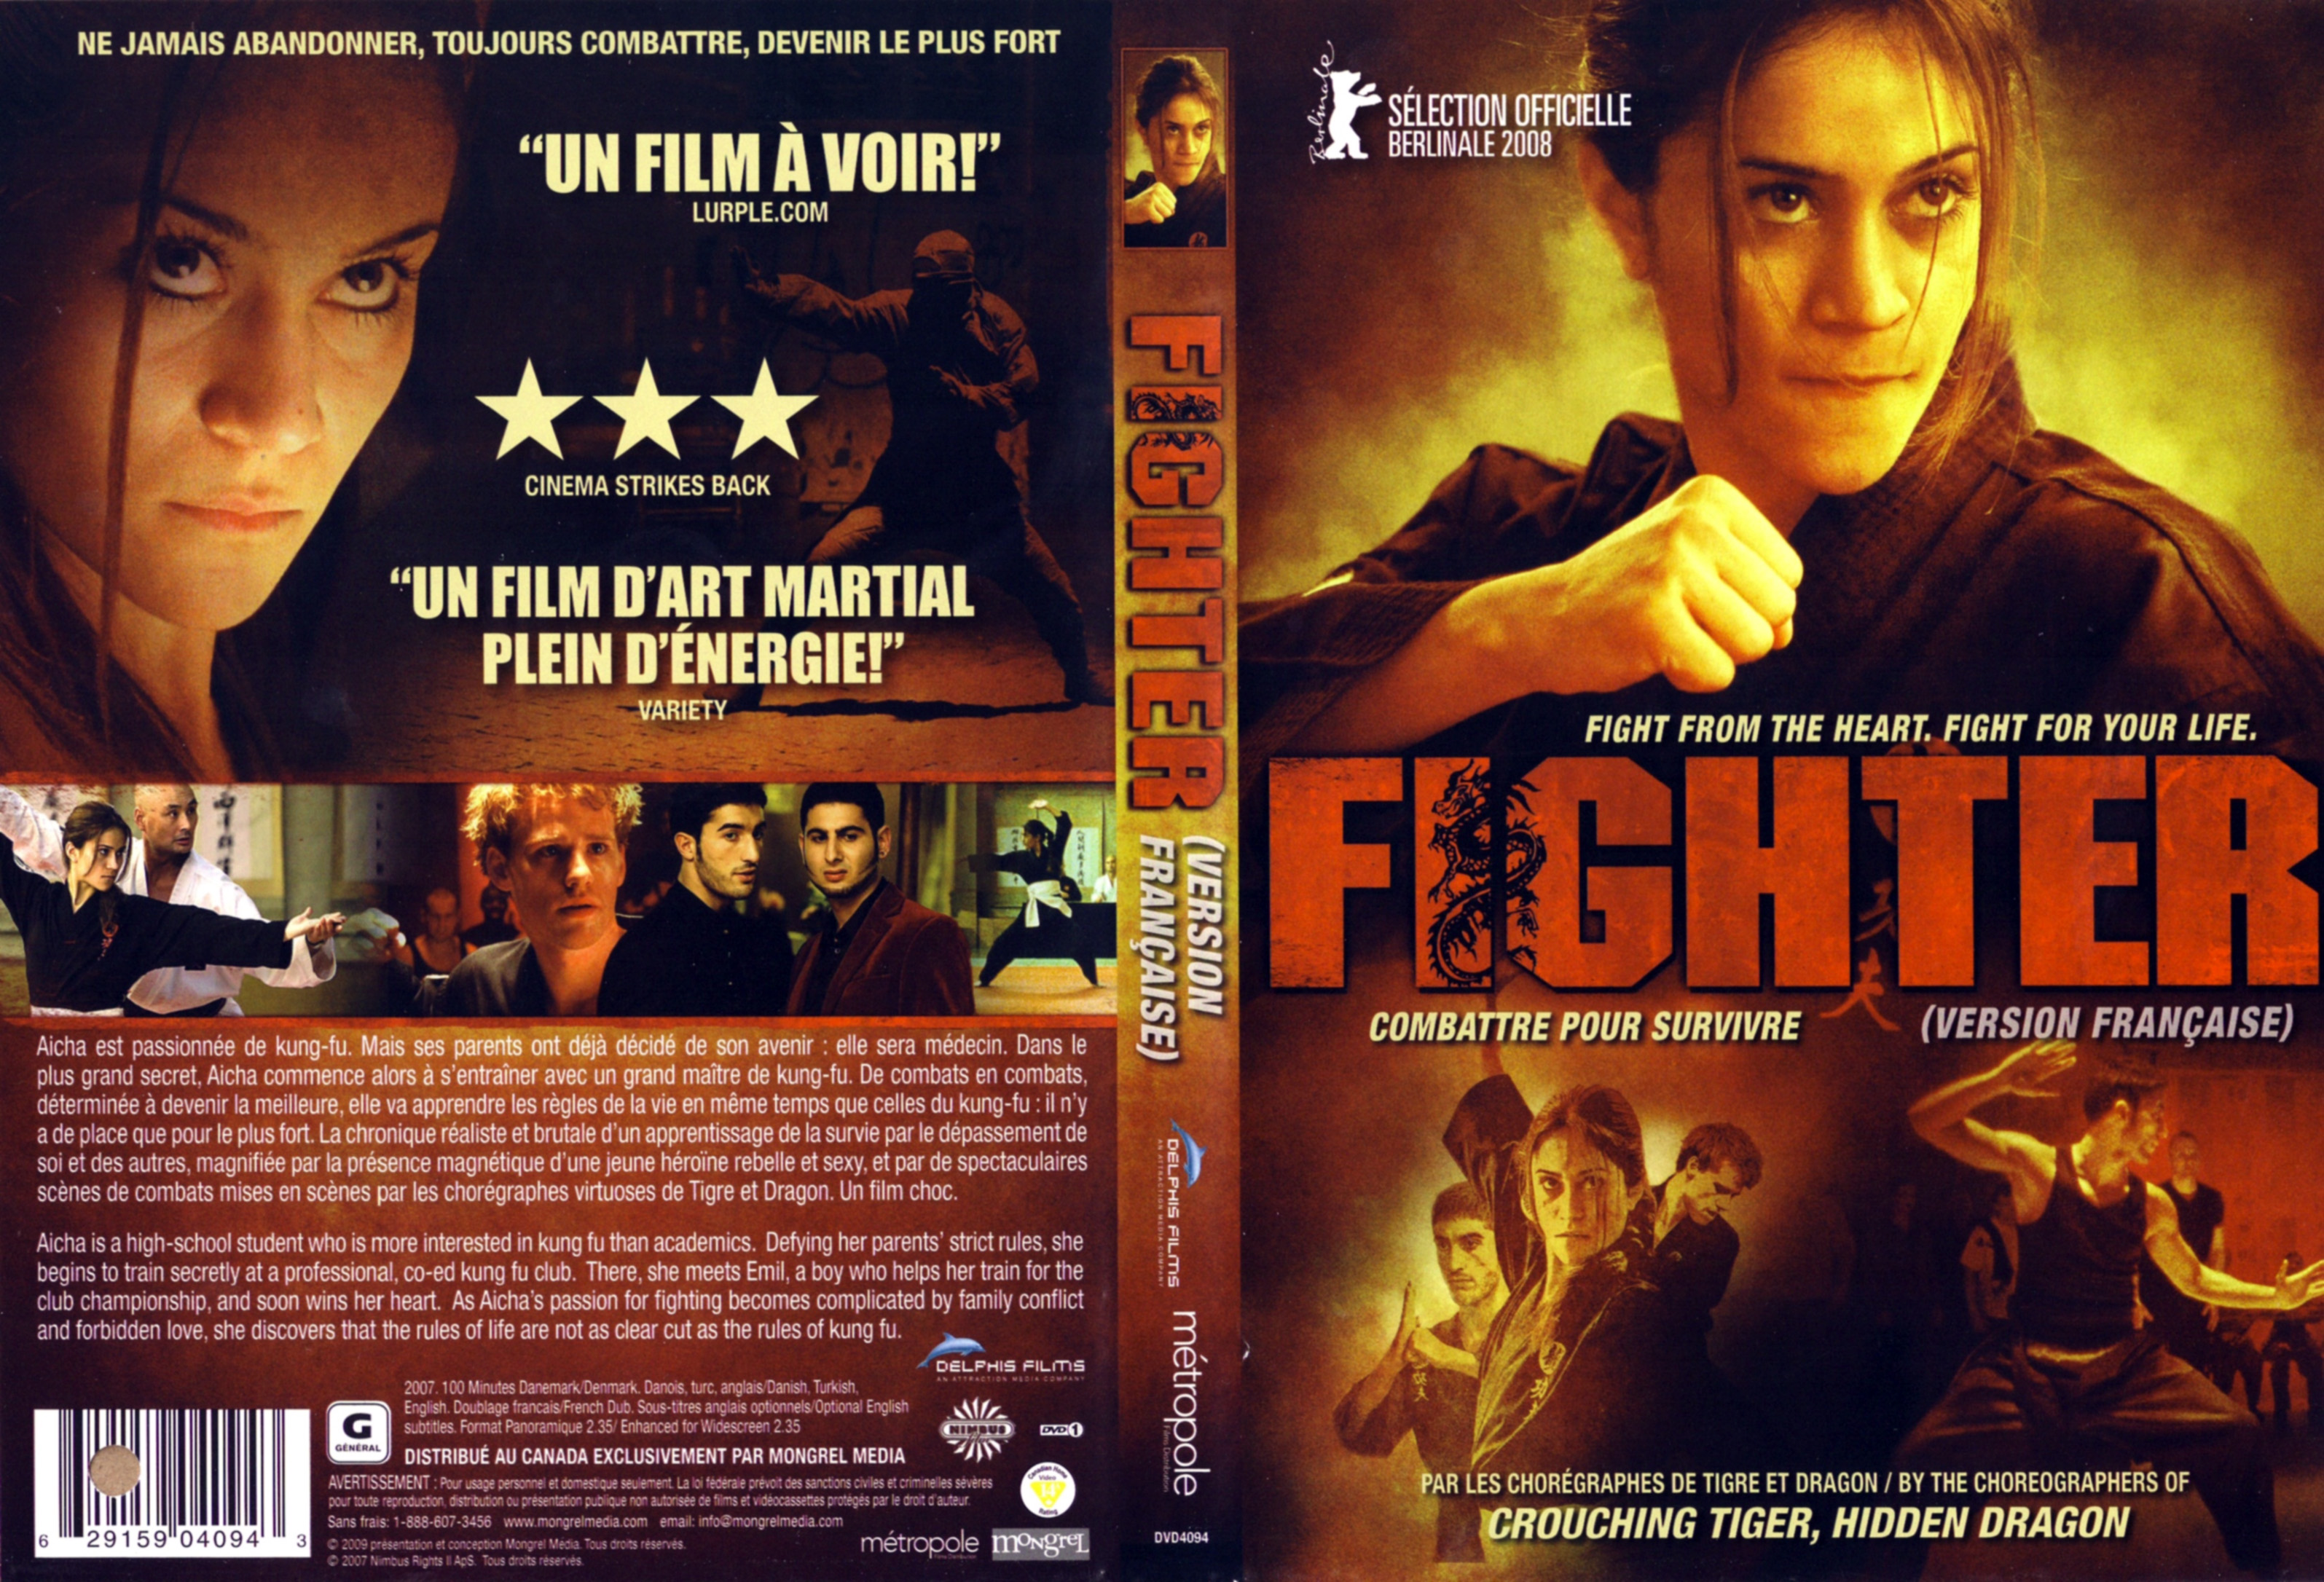 Jaquette DVD Fighter (Canadienne)